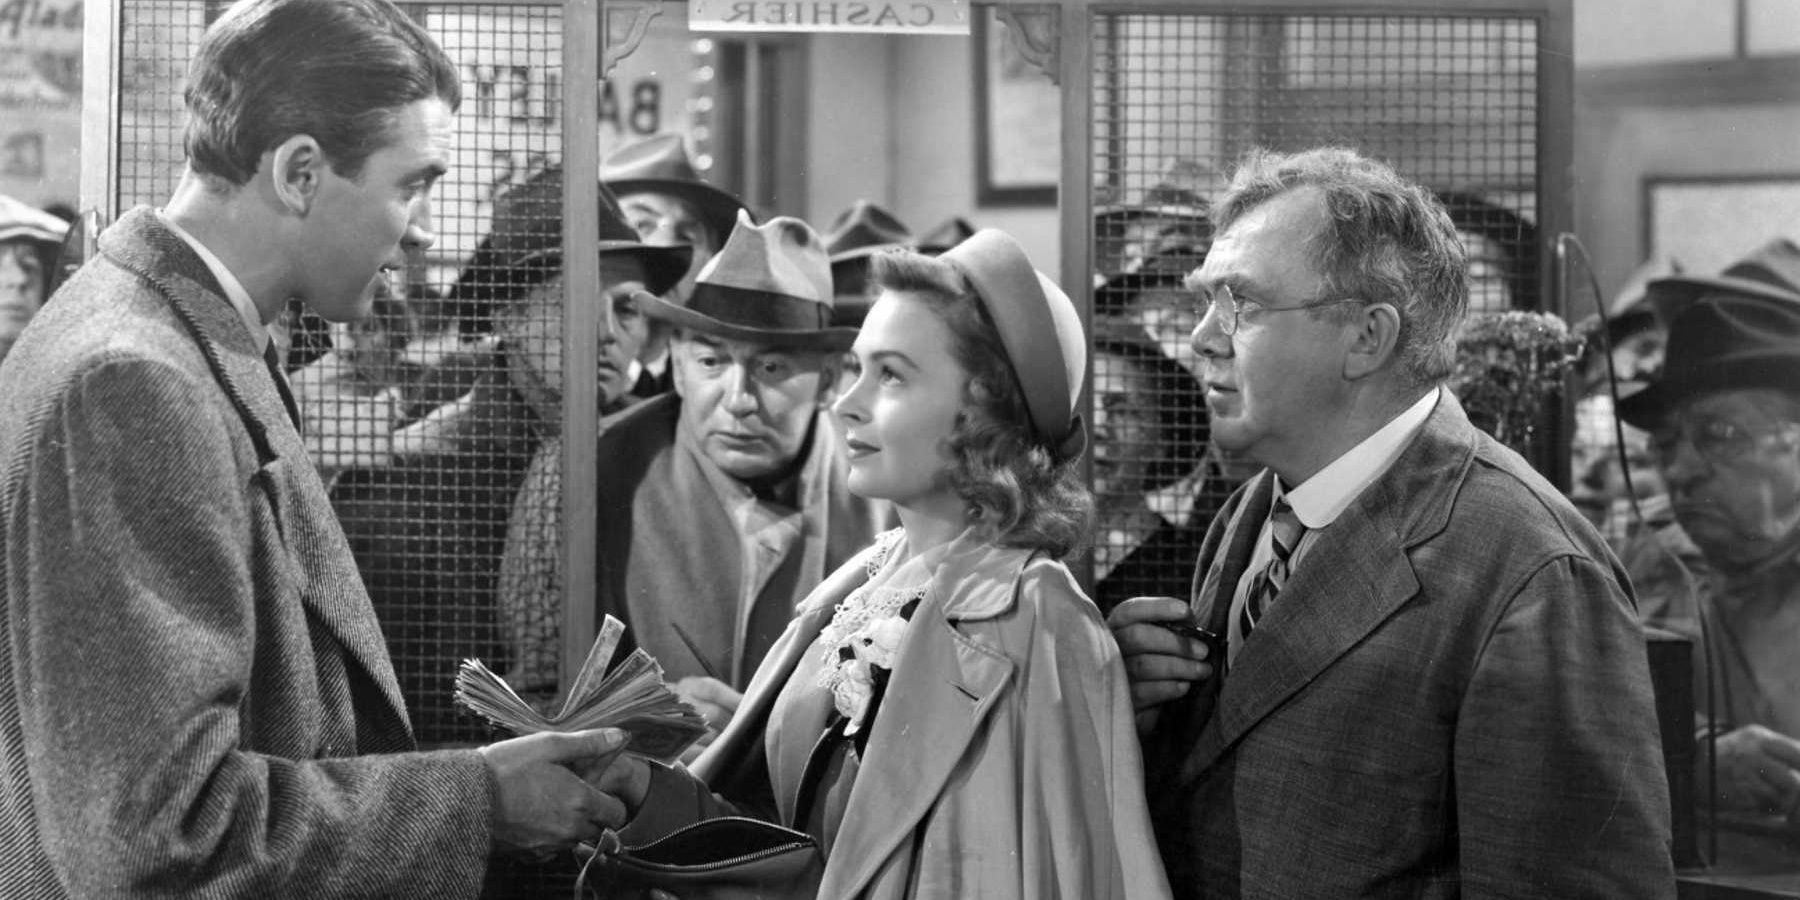 George handing out loans in It's a Wonderful Life 